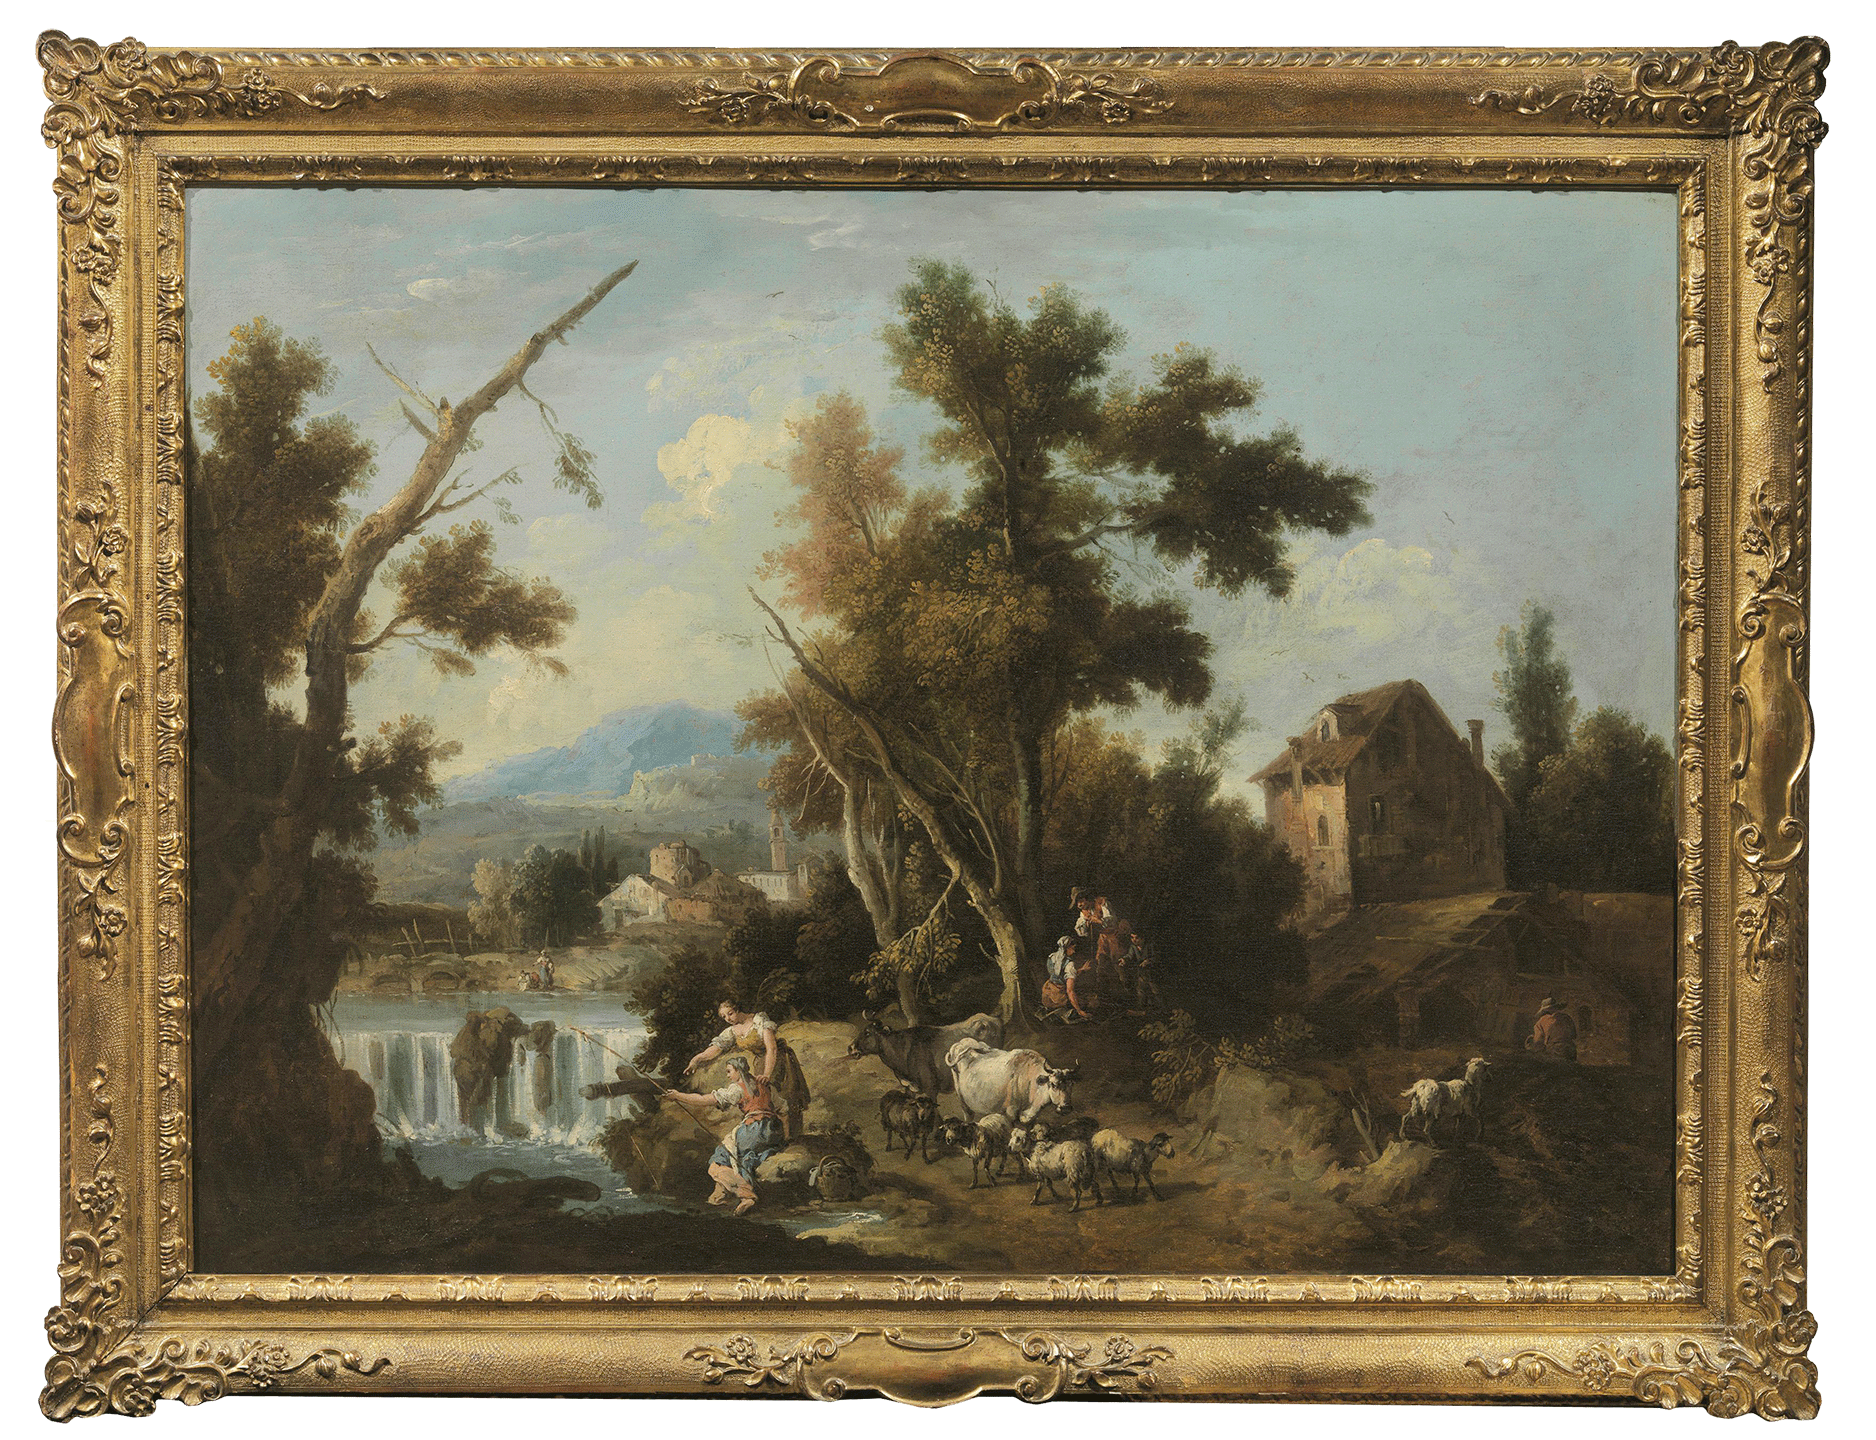 Wooden Landscape with farmers near a river